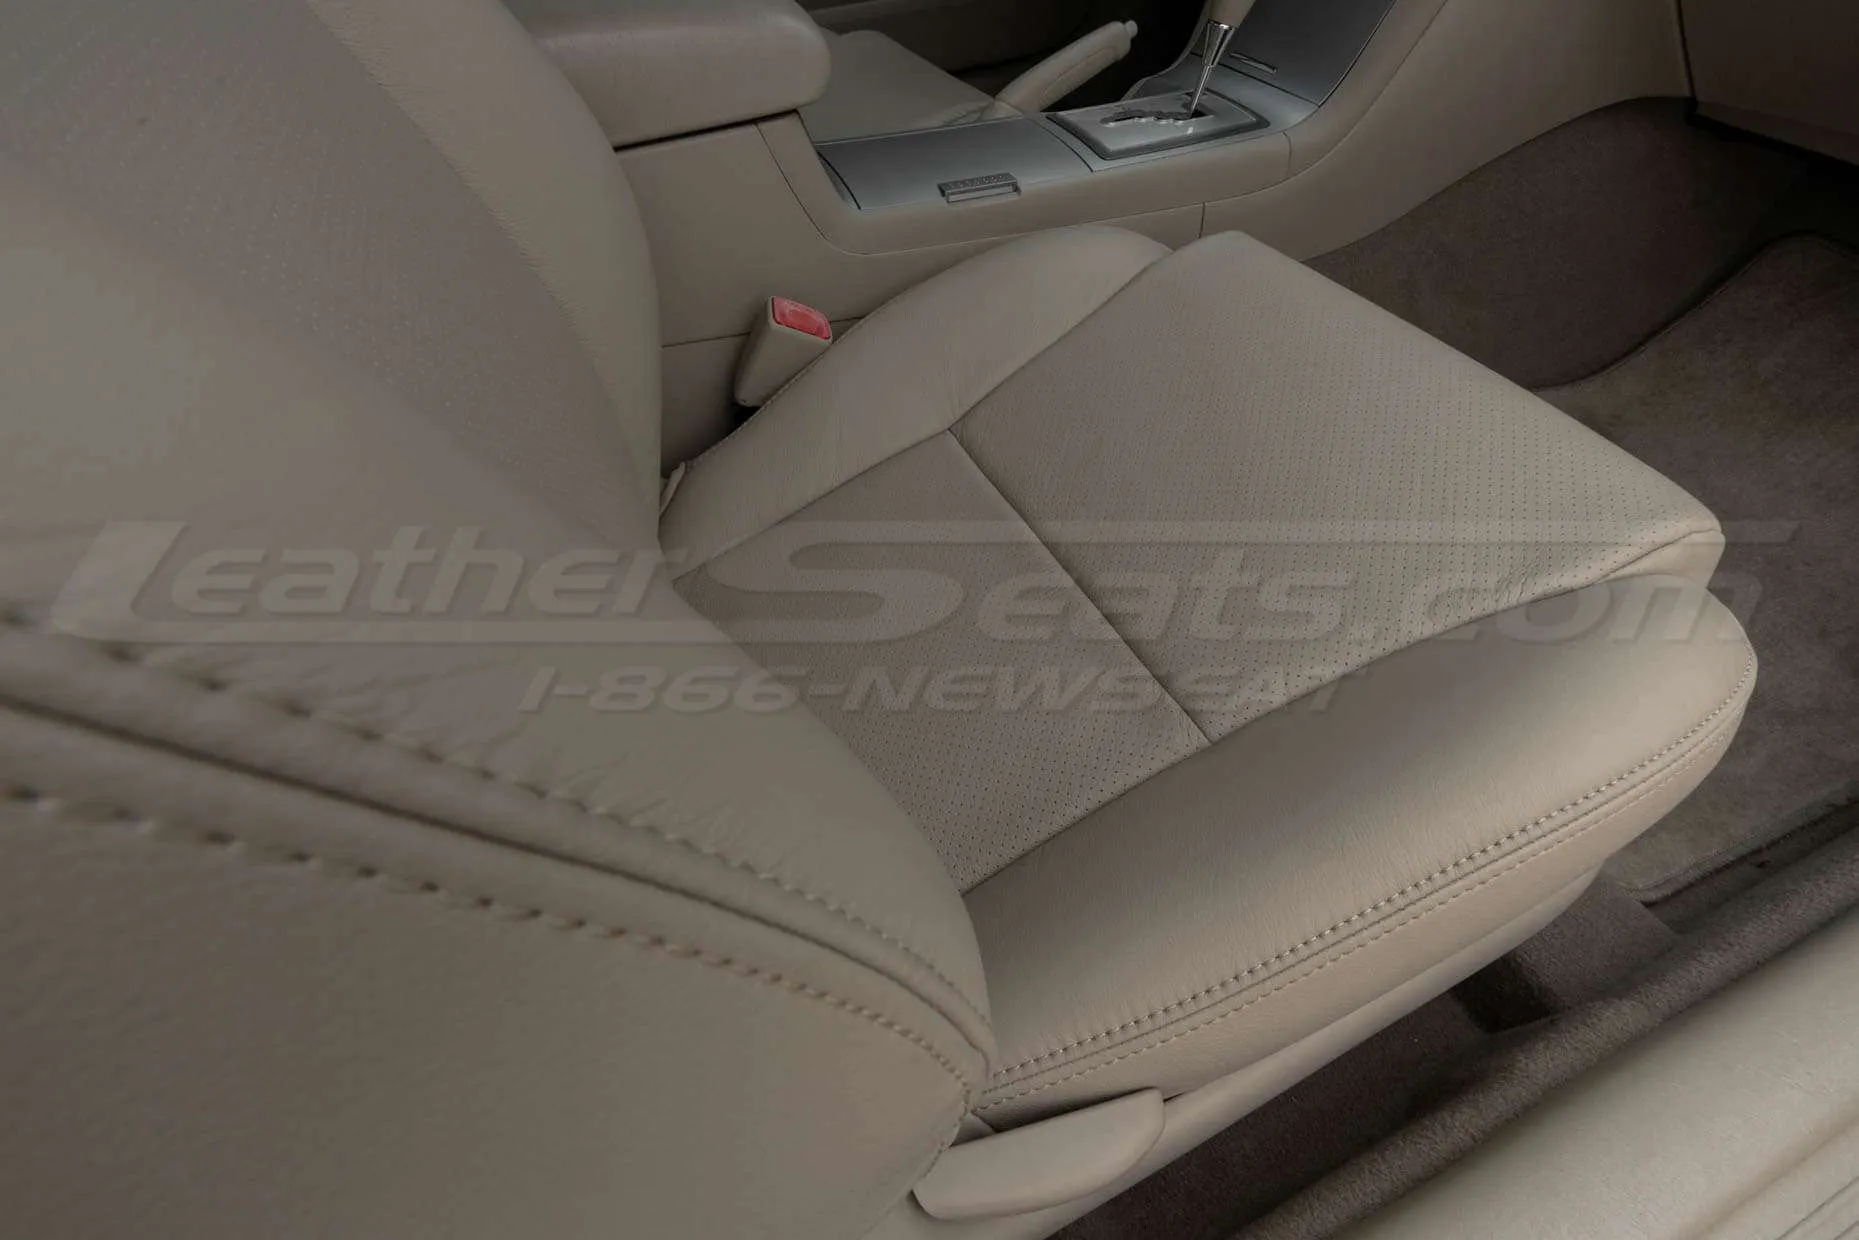 Matching double-stitching and perforated passenger cushion